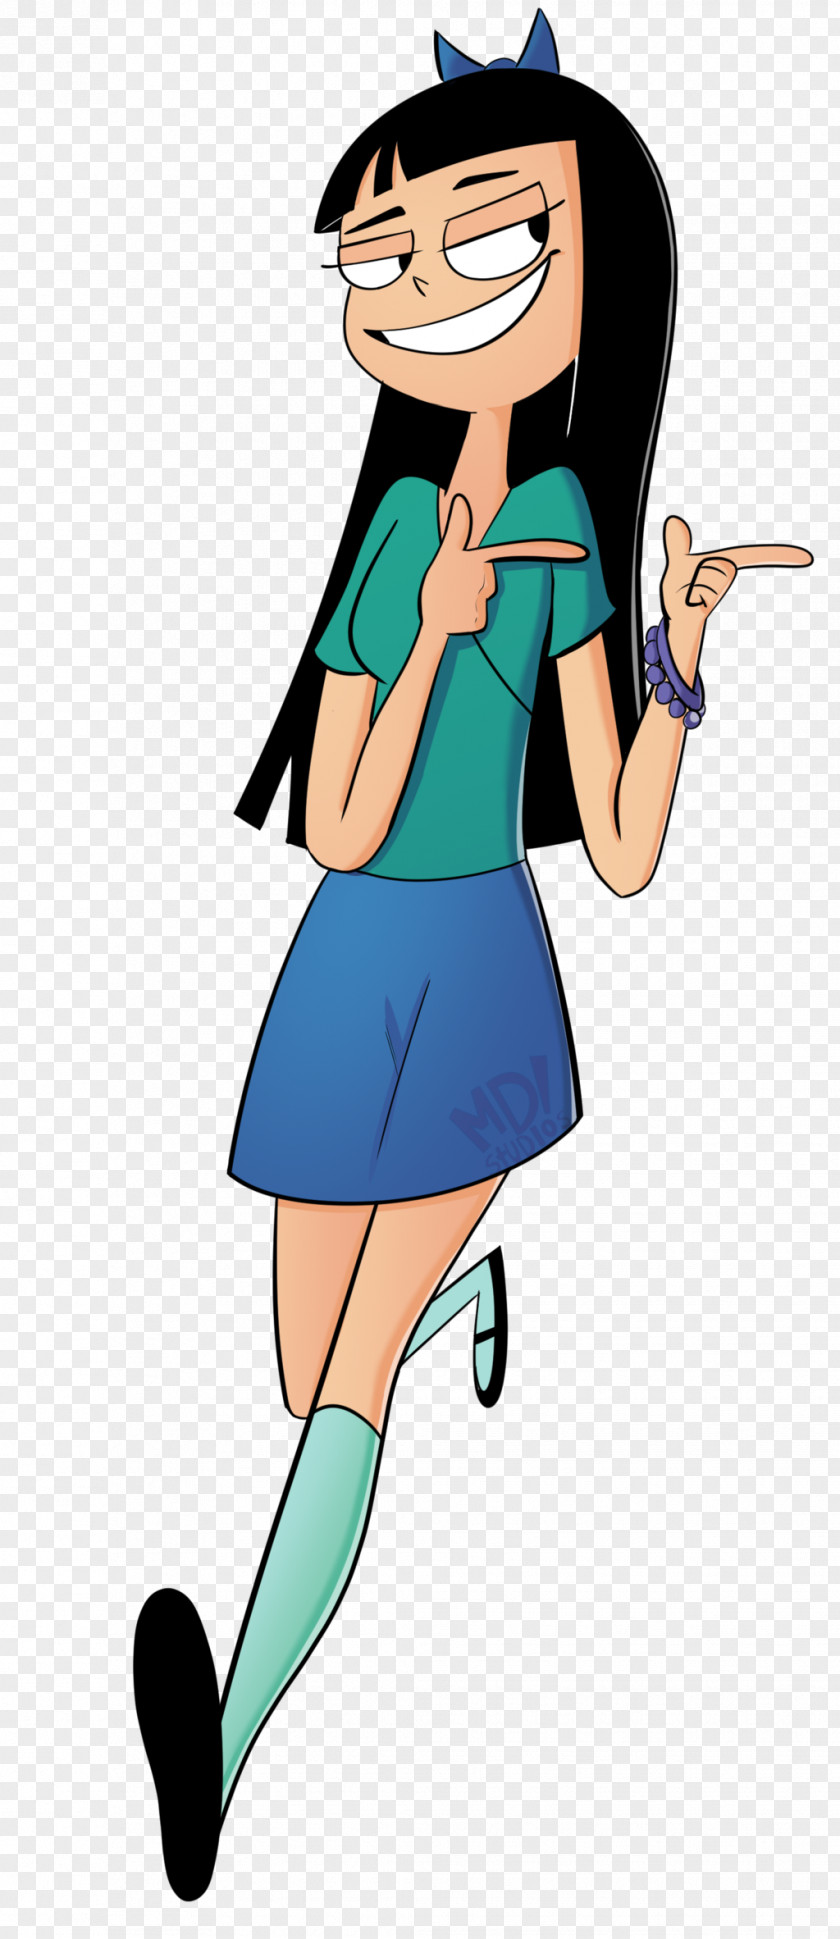 Stacy Hirano Phineas Flynn Candace Ferb Fletcher PNG